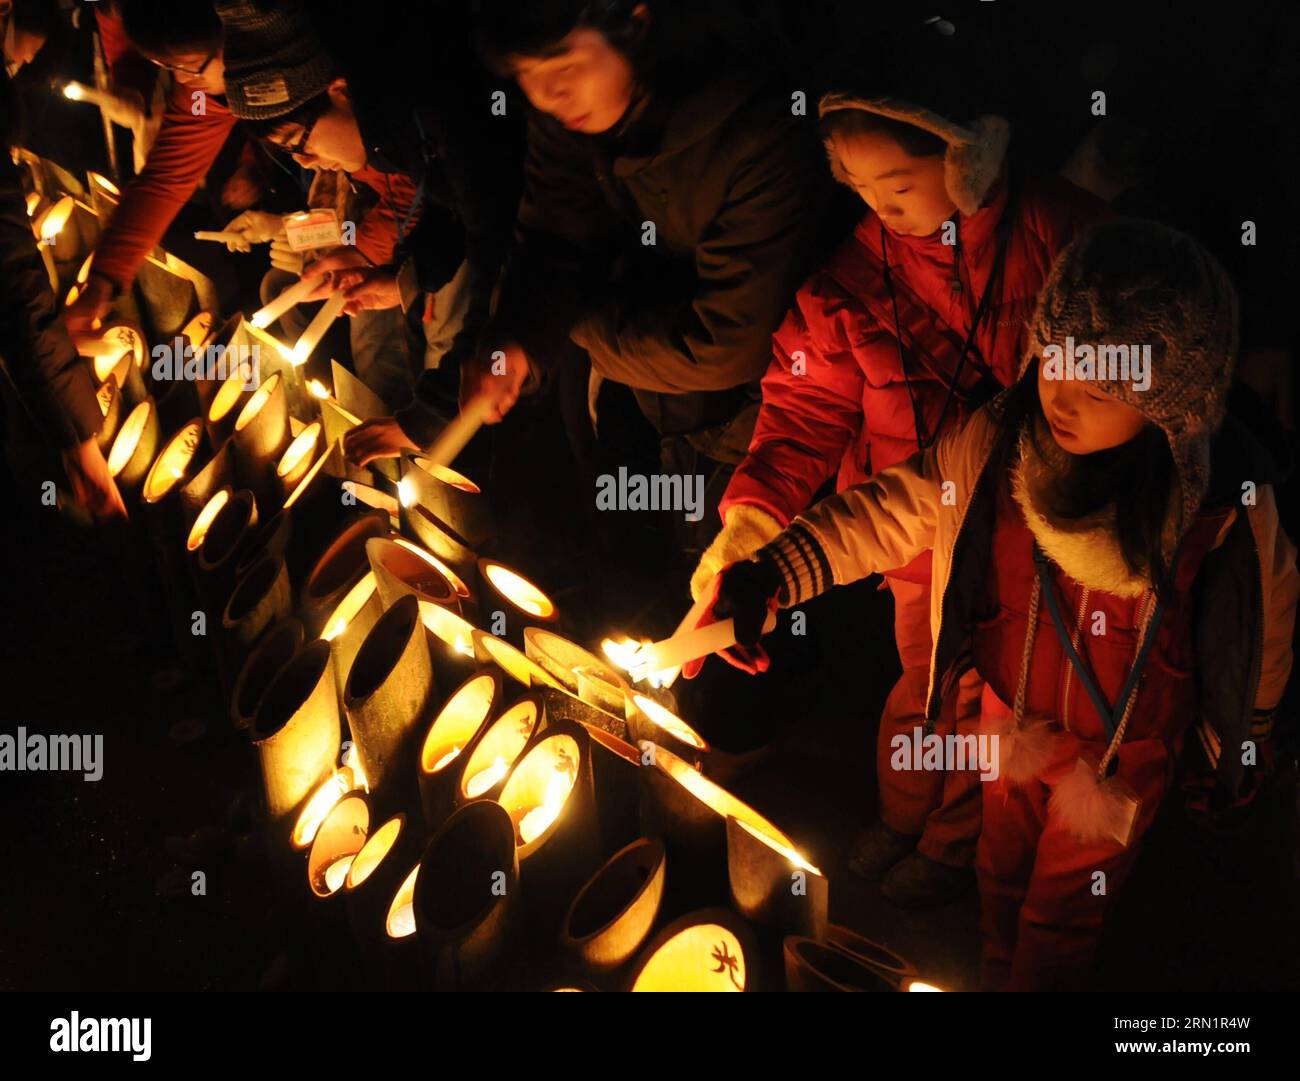 People light candles for the victims of the Great Hanshin Earthquake during a ceremony to mark the 20th anniversary of the earthquake in Kobe, western Japan, early January 17, 2015. More than 14,000 people gathered in Japan s Kobe on Friday morning to pray for the souls of the 6,434 victims of the 1995 Great Hanshin Earthquake. ) (lyi) JAPAN-KOBE-GREAT HANSHIN EARTHQUAKE-ANNIVERSARY MAxXINGHUA PUBLICATIONxNOTxINxCHN   Celebrities Light Candles for The Victims of The Great  Earthquake during a Ceremony to Mark The 20th Anniversary of The Earthquake in Kobe Western Japan Early January 17 2015 Mo Stock Photo